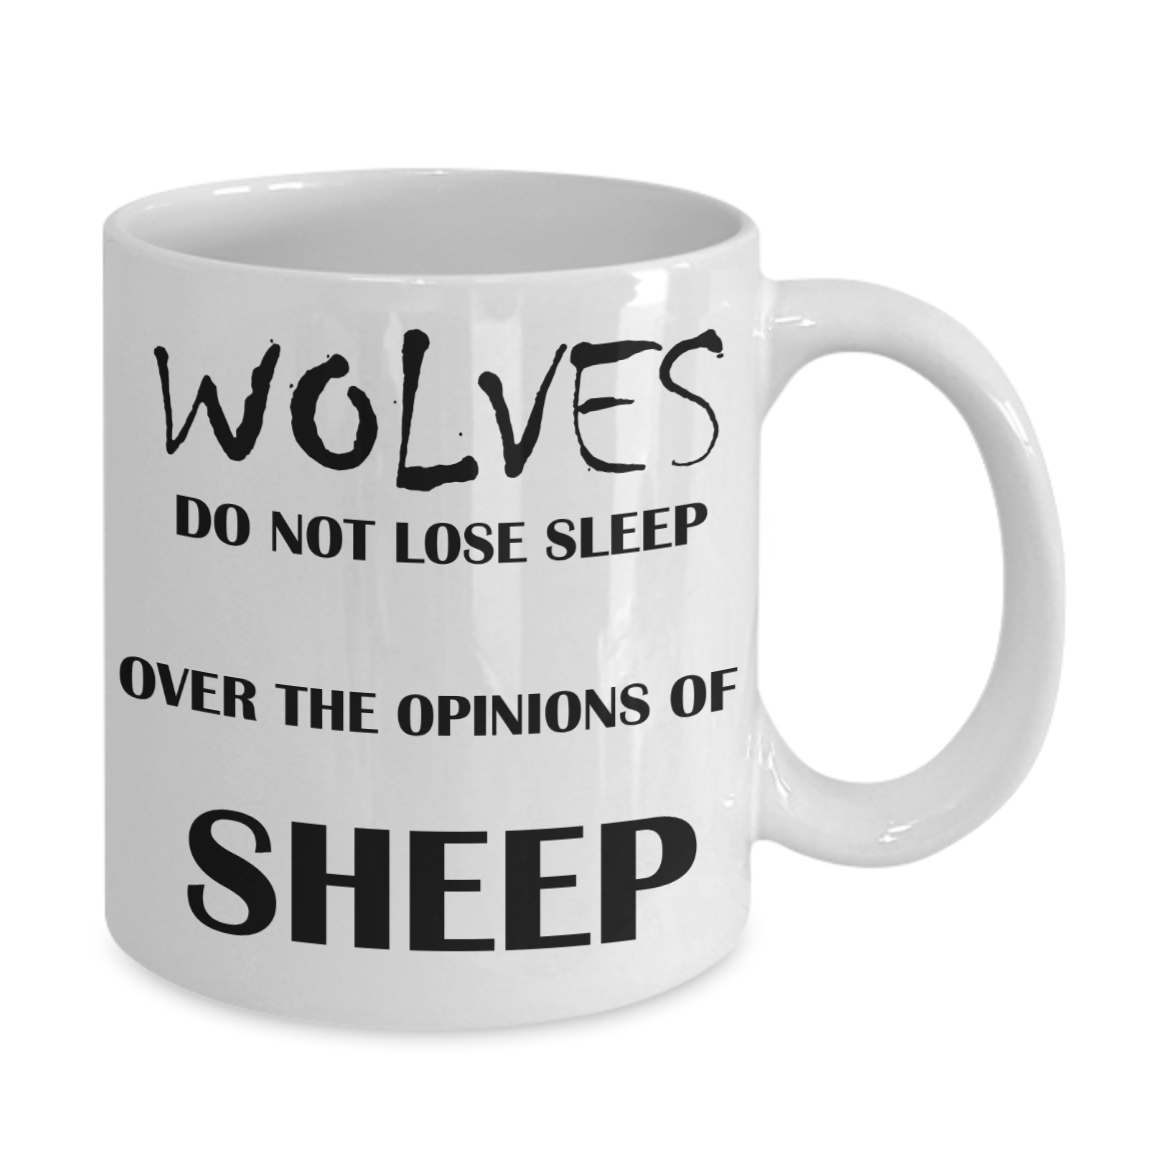 Wolves do not lose sleep - Inspirational Quotes Coffee Mug